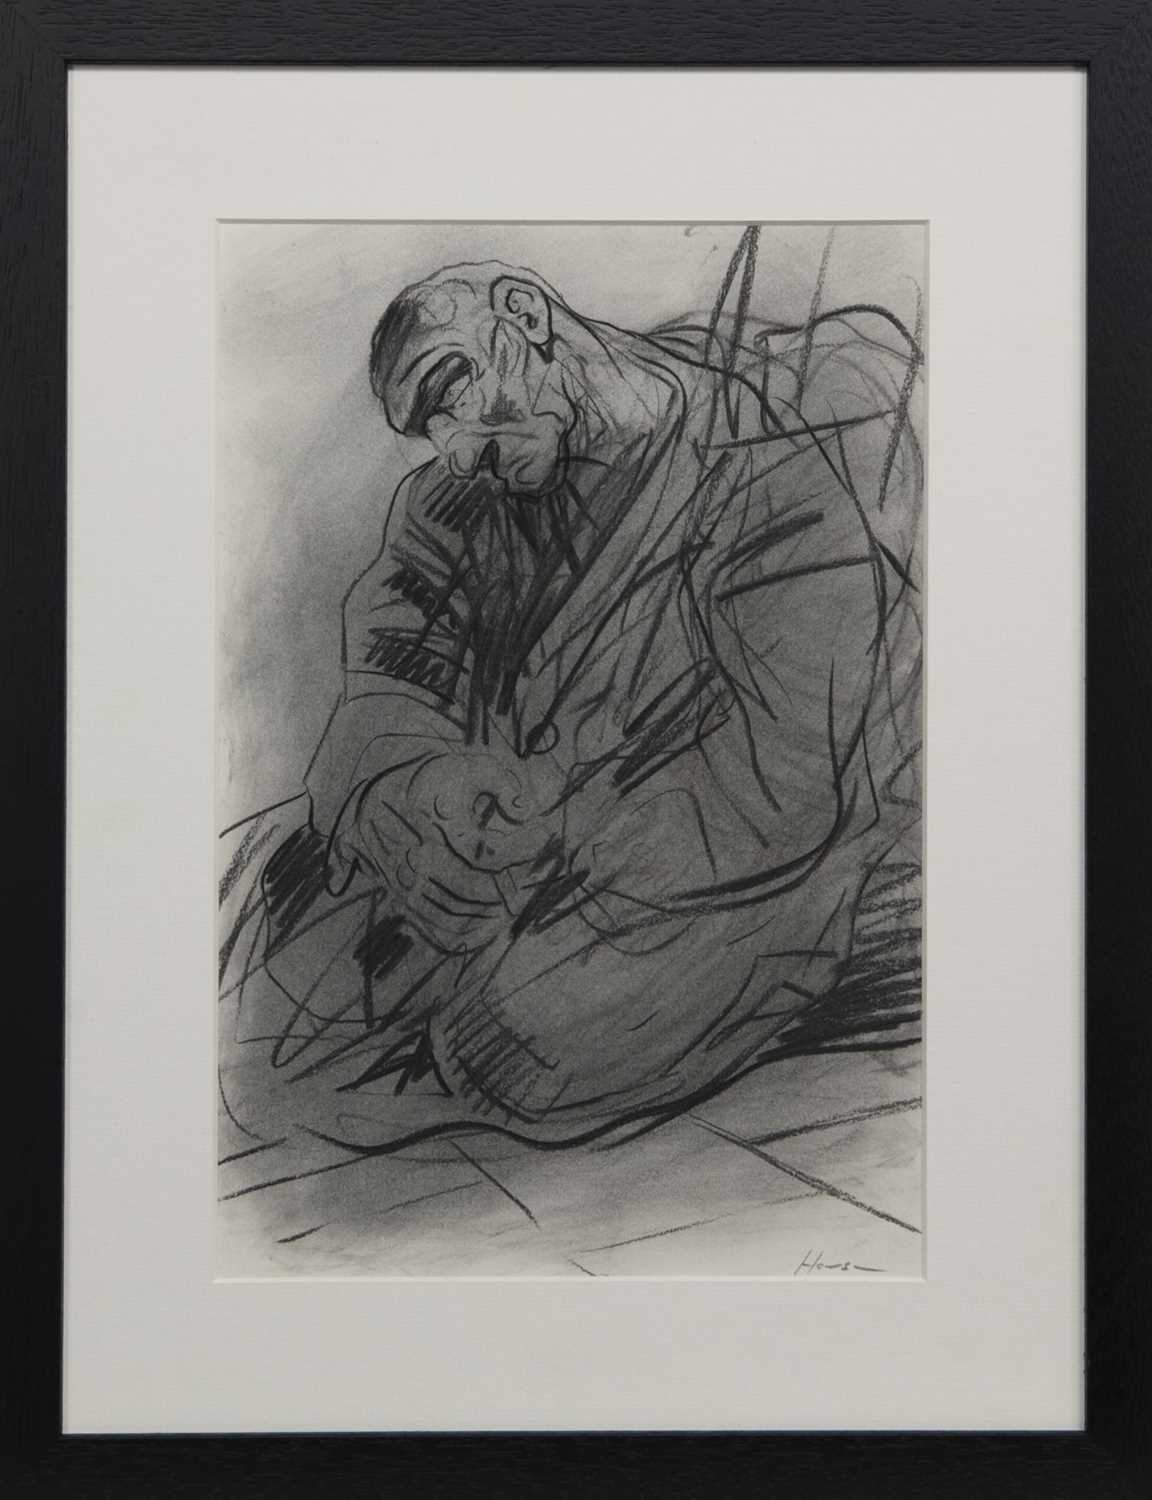 Lot 533 - STUDY FOR "THE PENITENCE OF KING DAVID" NO. 4, A CHARCOAL BY PETER HOWSON